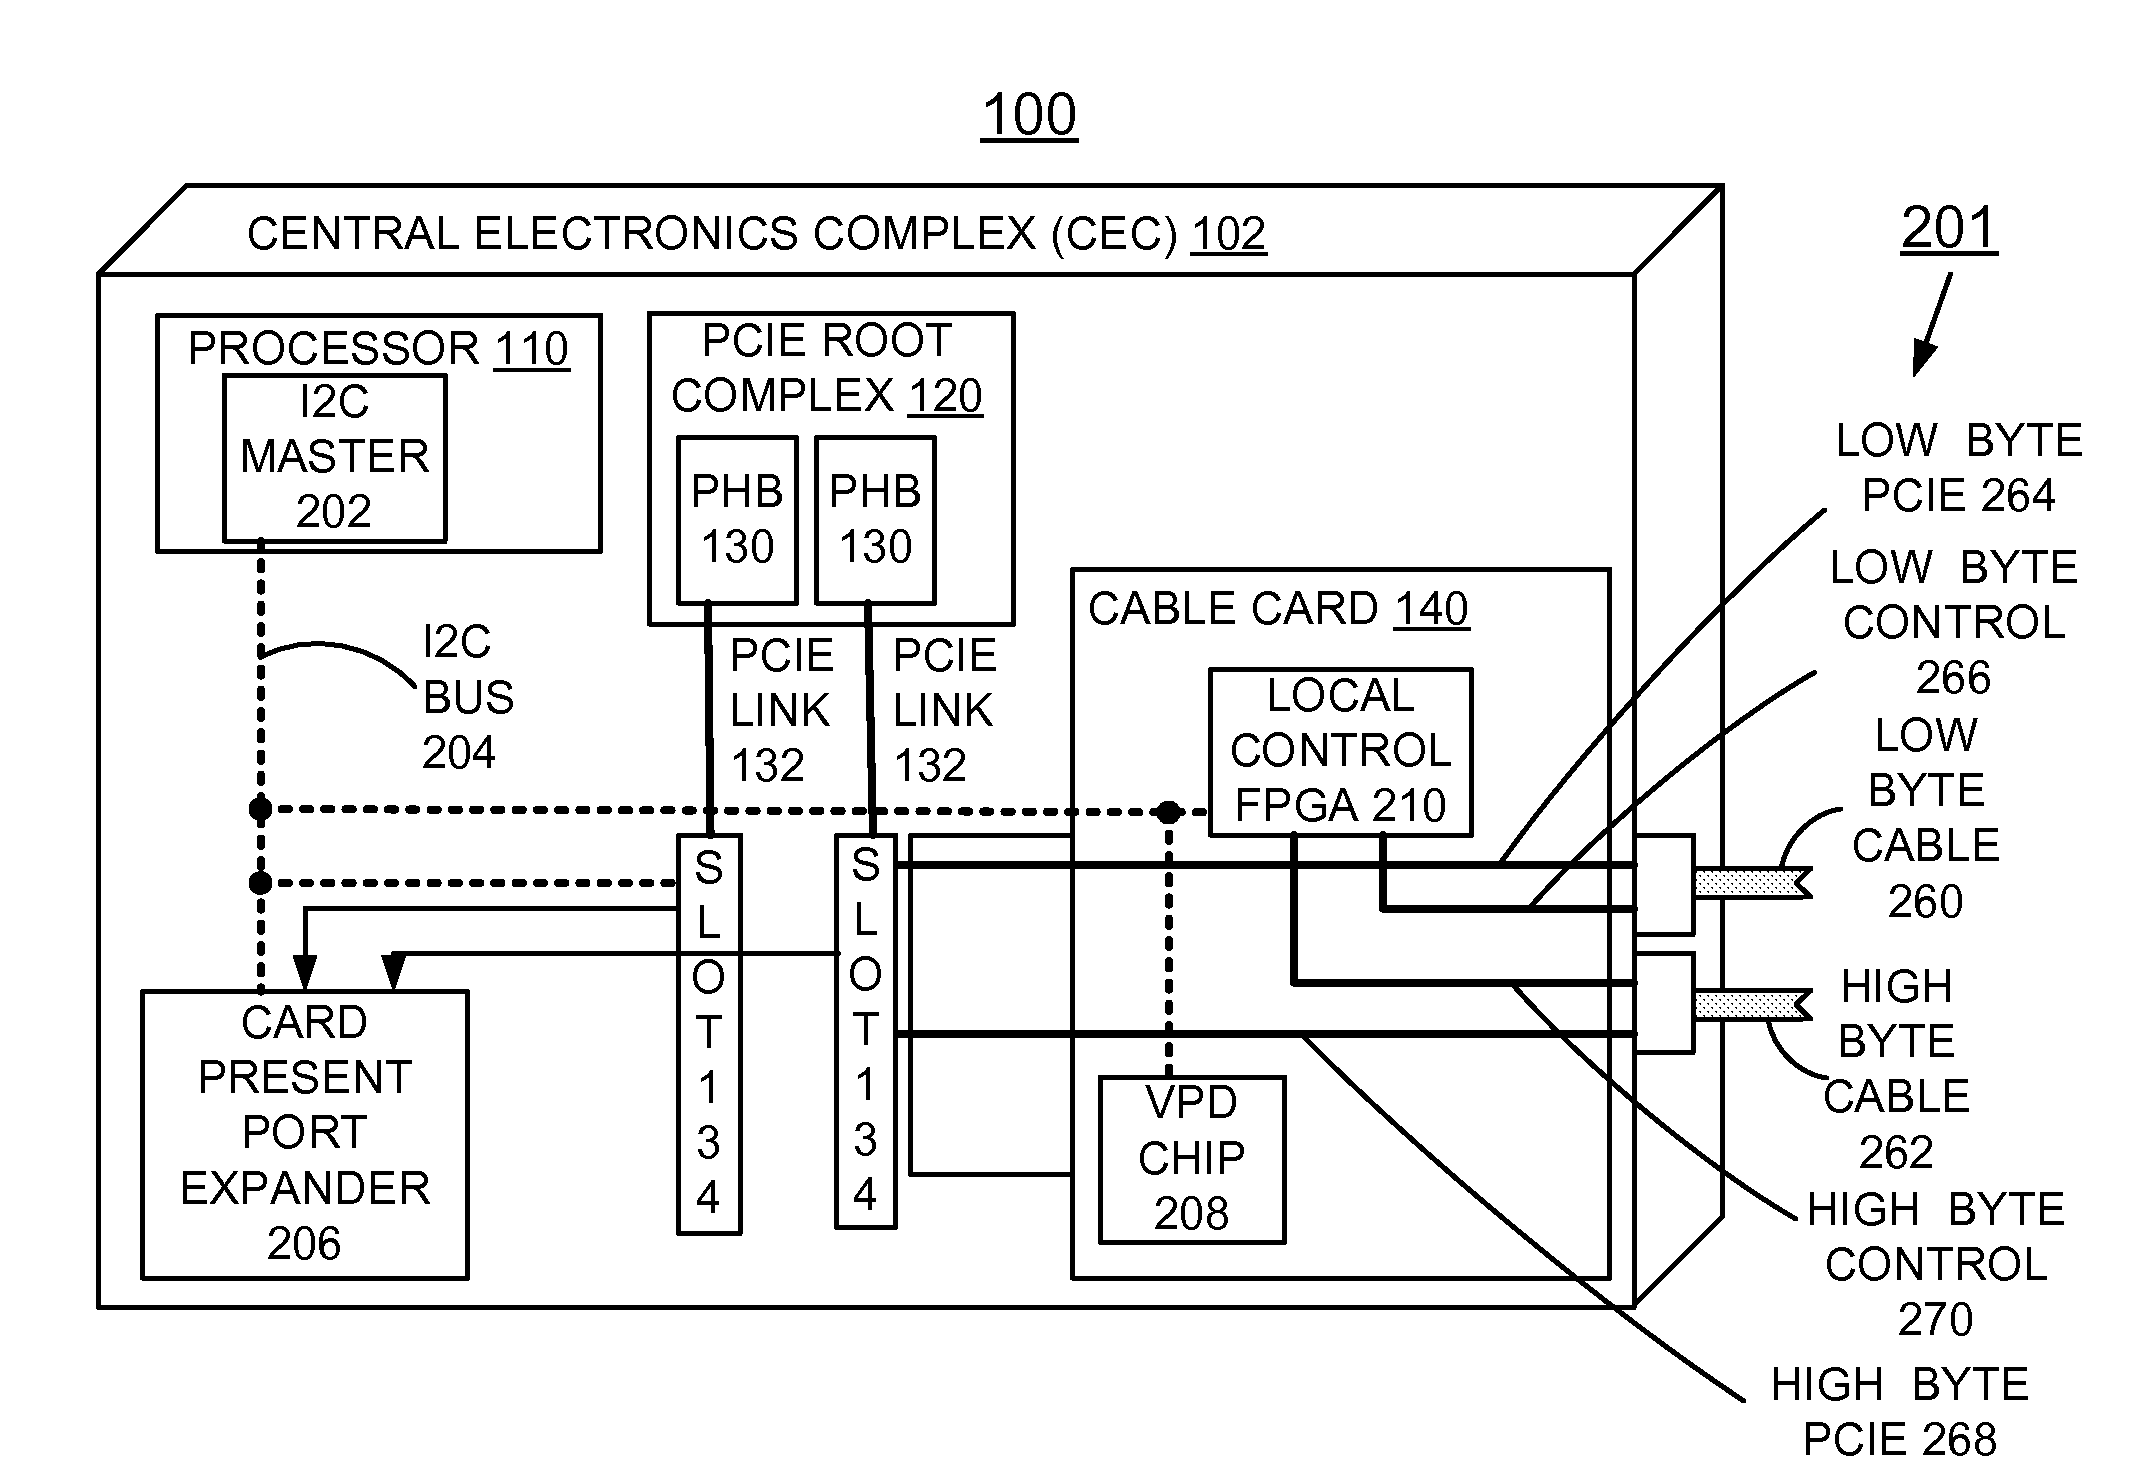 Implementing health check for optical cable attached PCIE enclosure